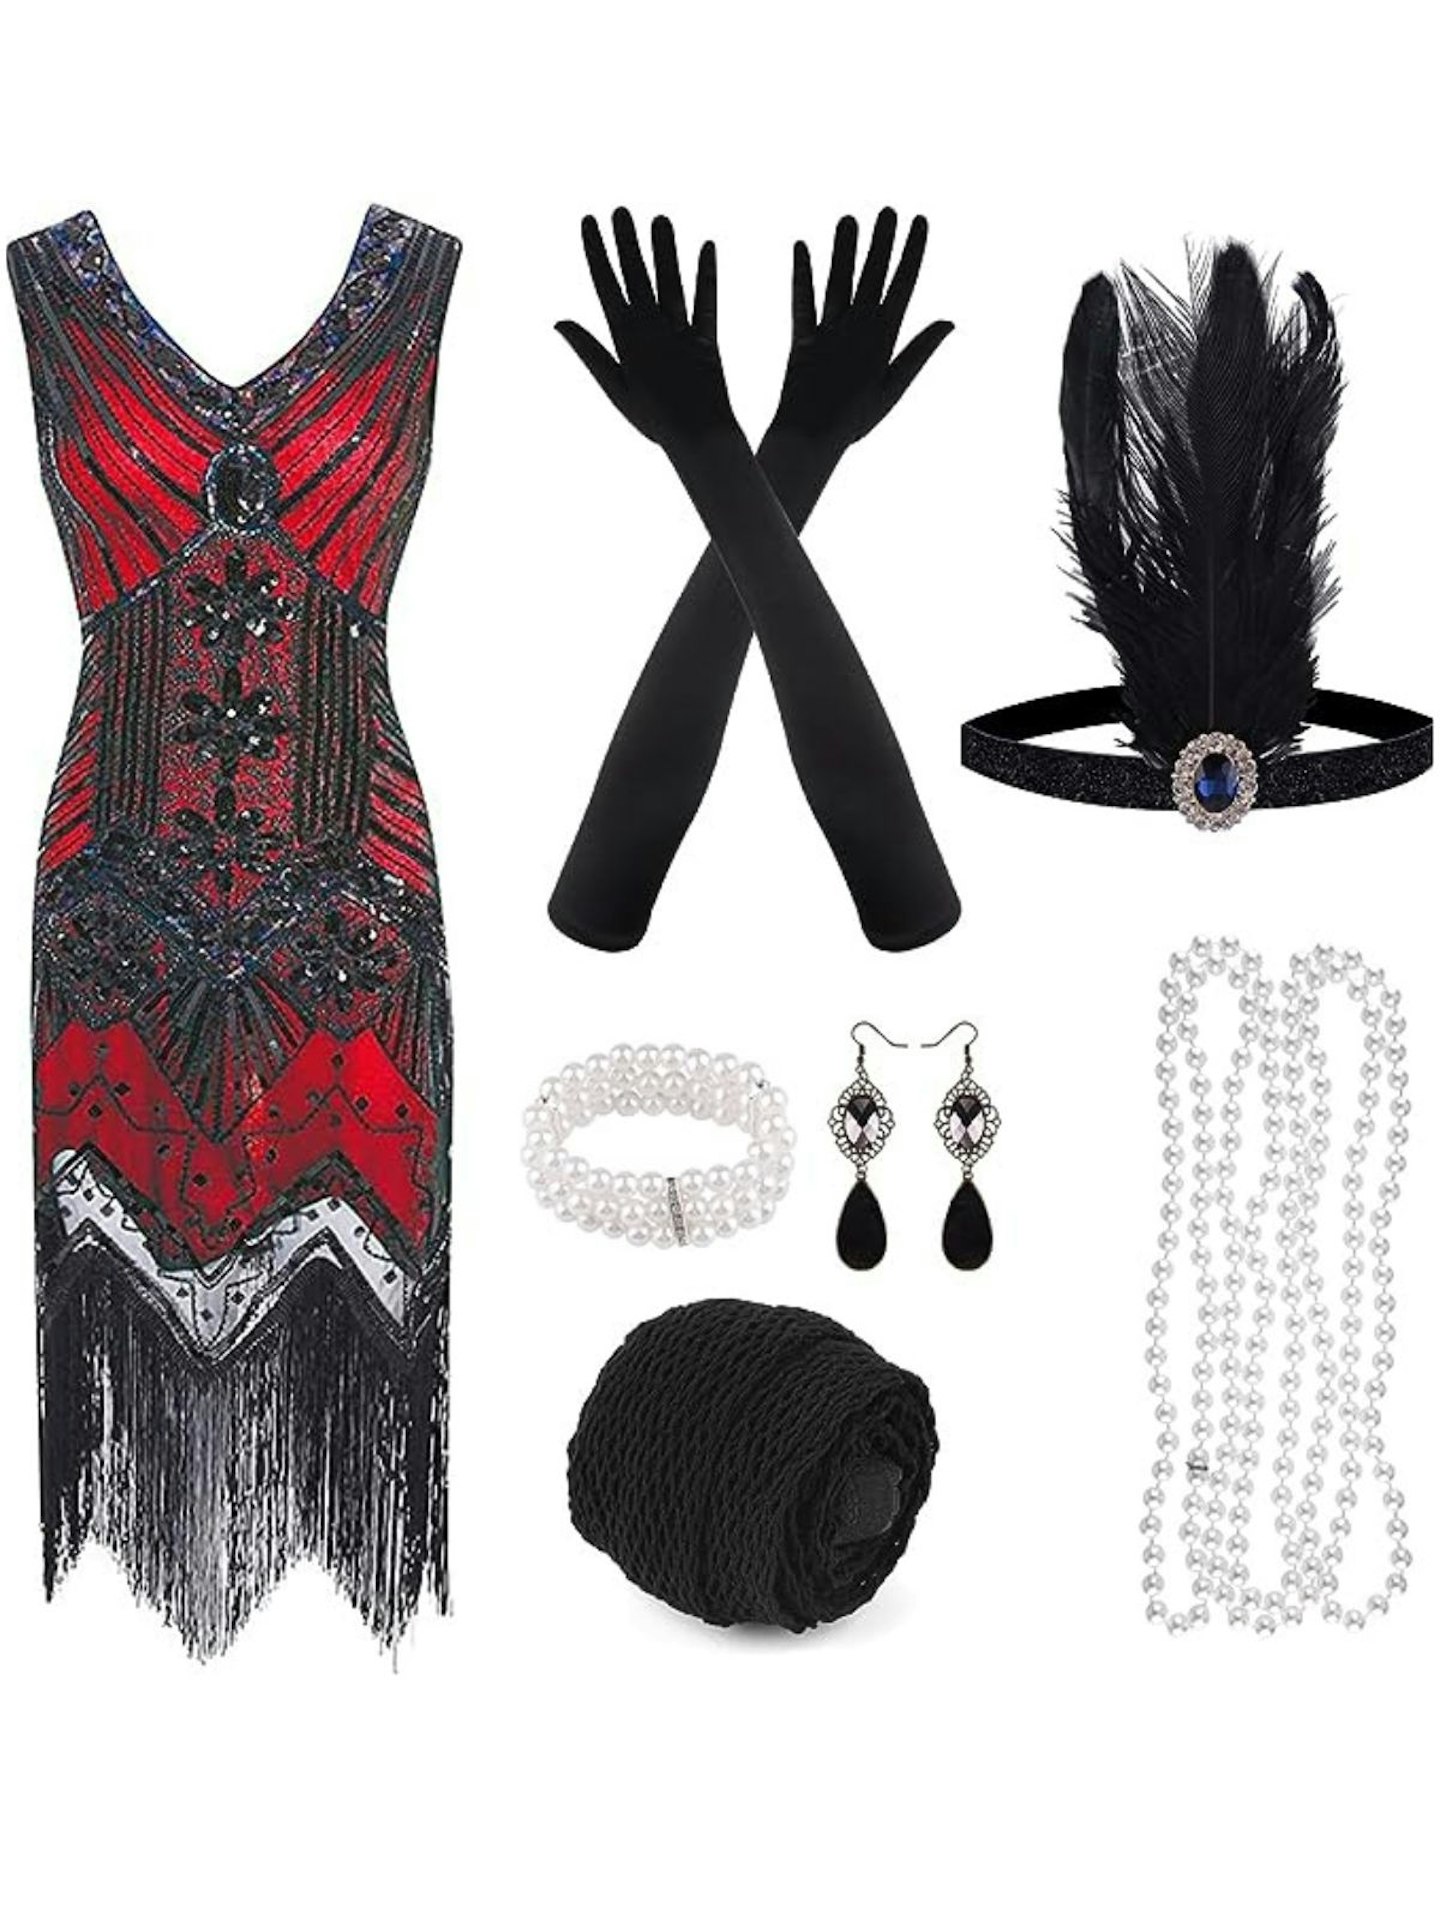 FEPITO 1920s V Neck Sequin Beaded Fringed Dress with Accessories